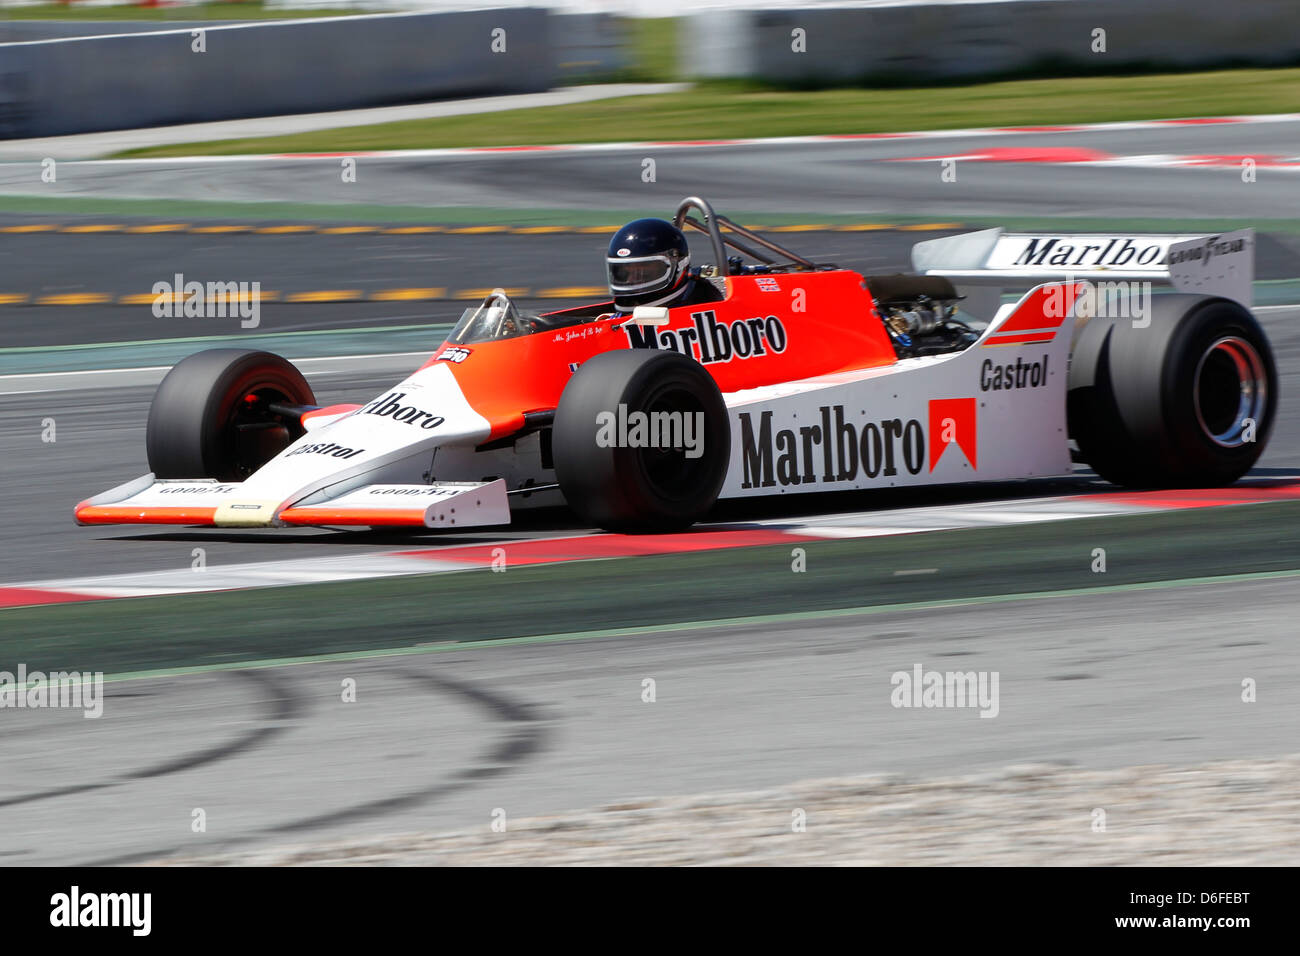 FIA Masters Historic Formula One race at Montmelo 12th April 2013 - Mr John of B in 1980 McLaren M29 Stock Photo